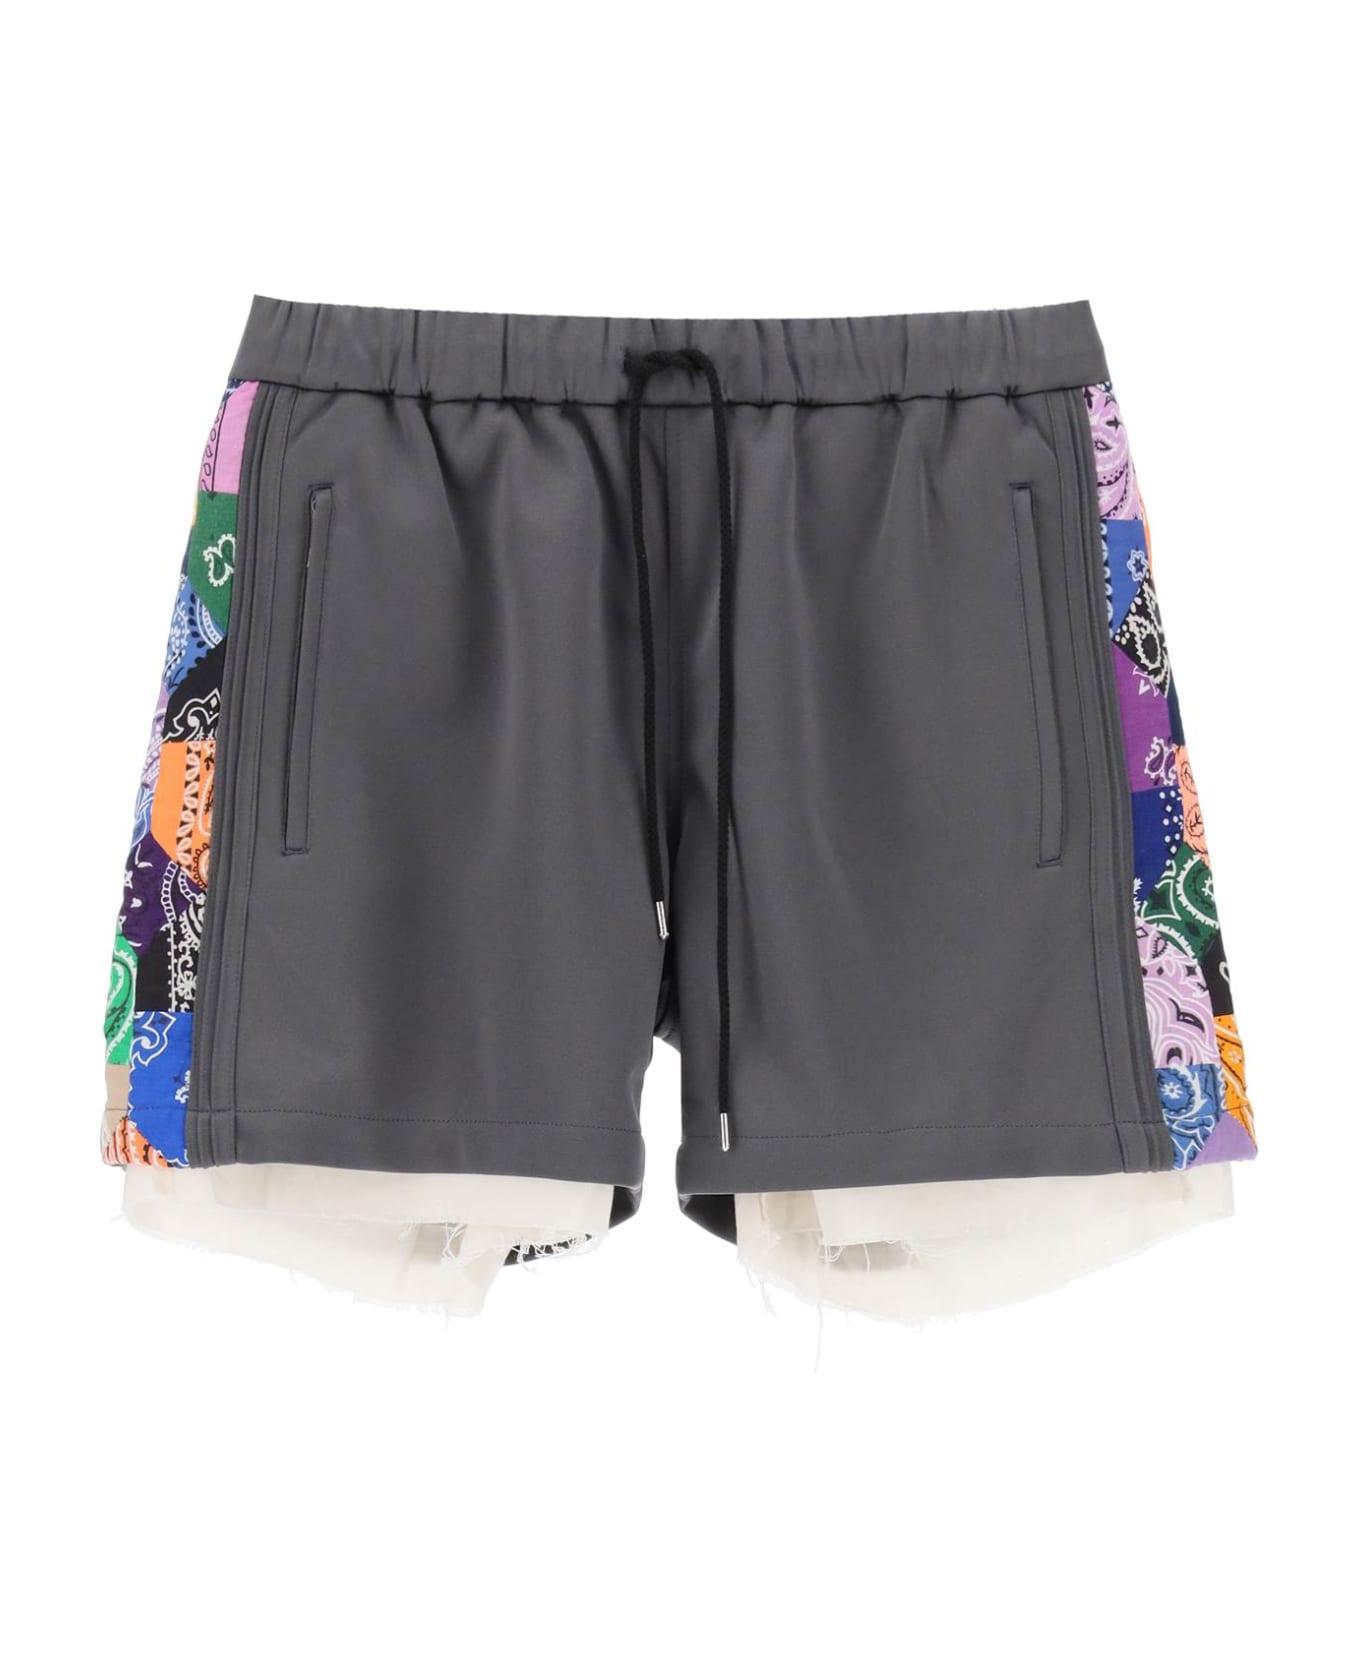 Children of the Discordance Jersey Shorts With Bandana Bands - GRAY (Grey) ショートパンツ